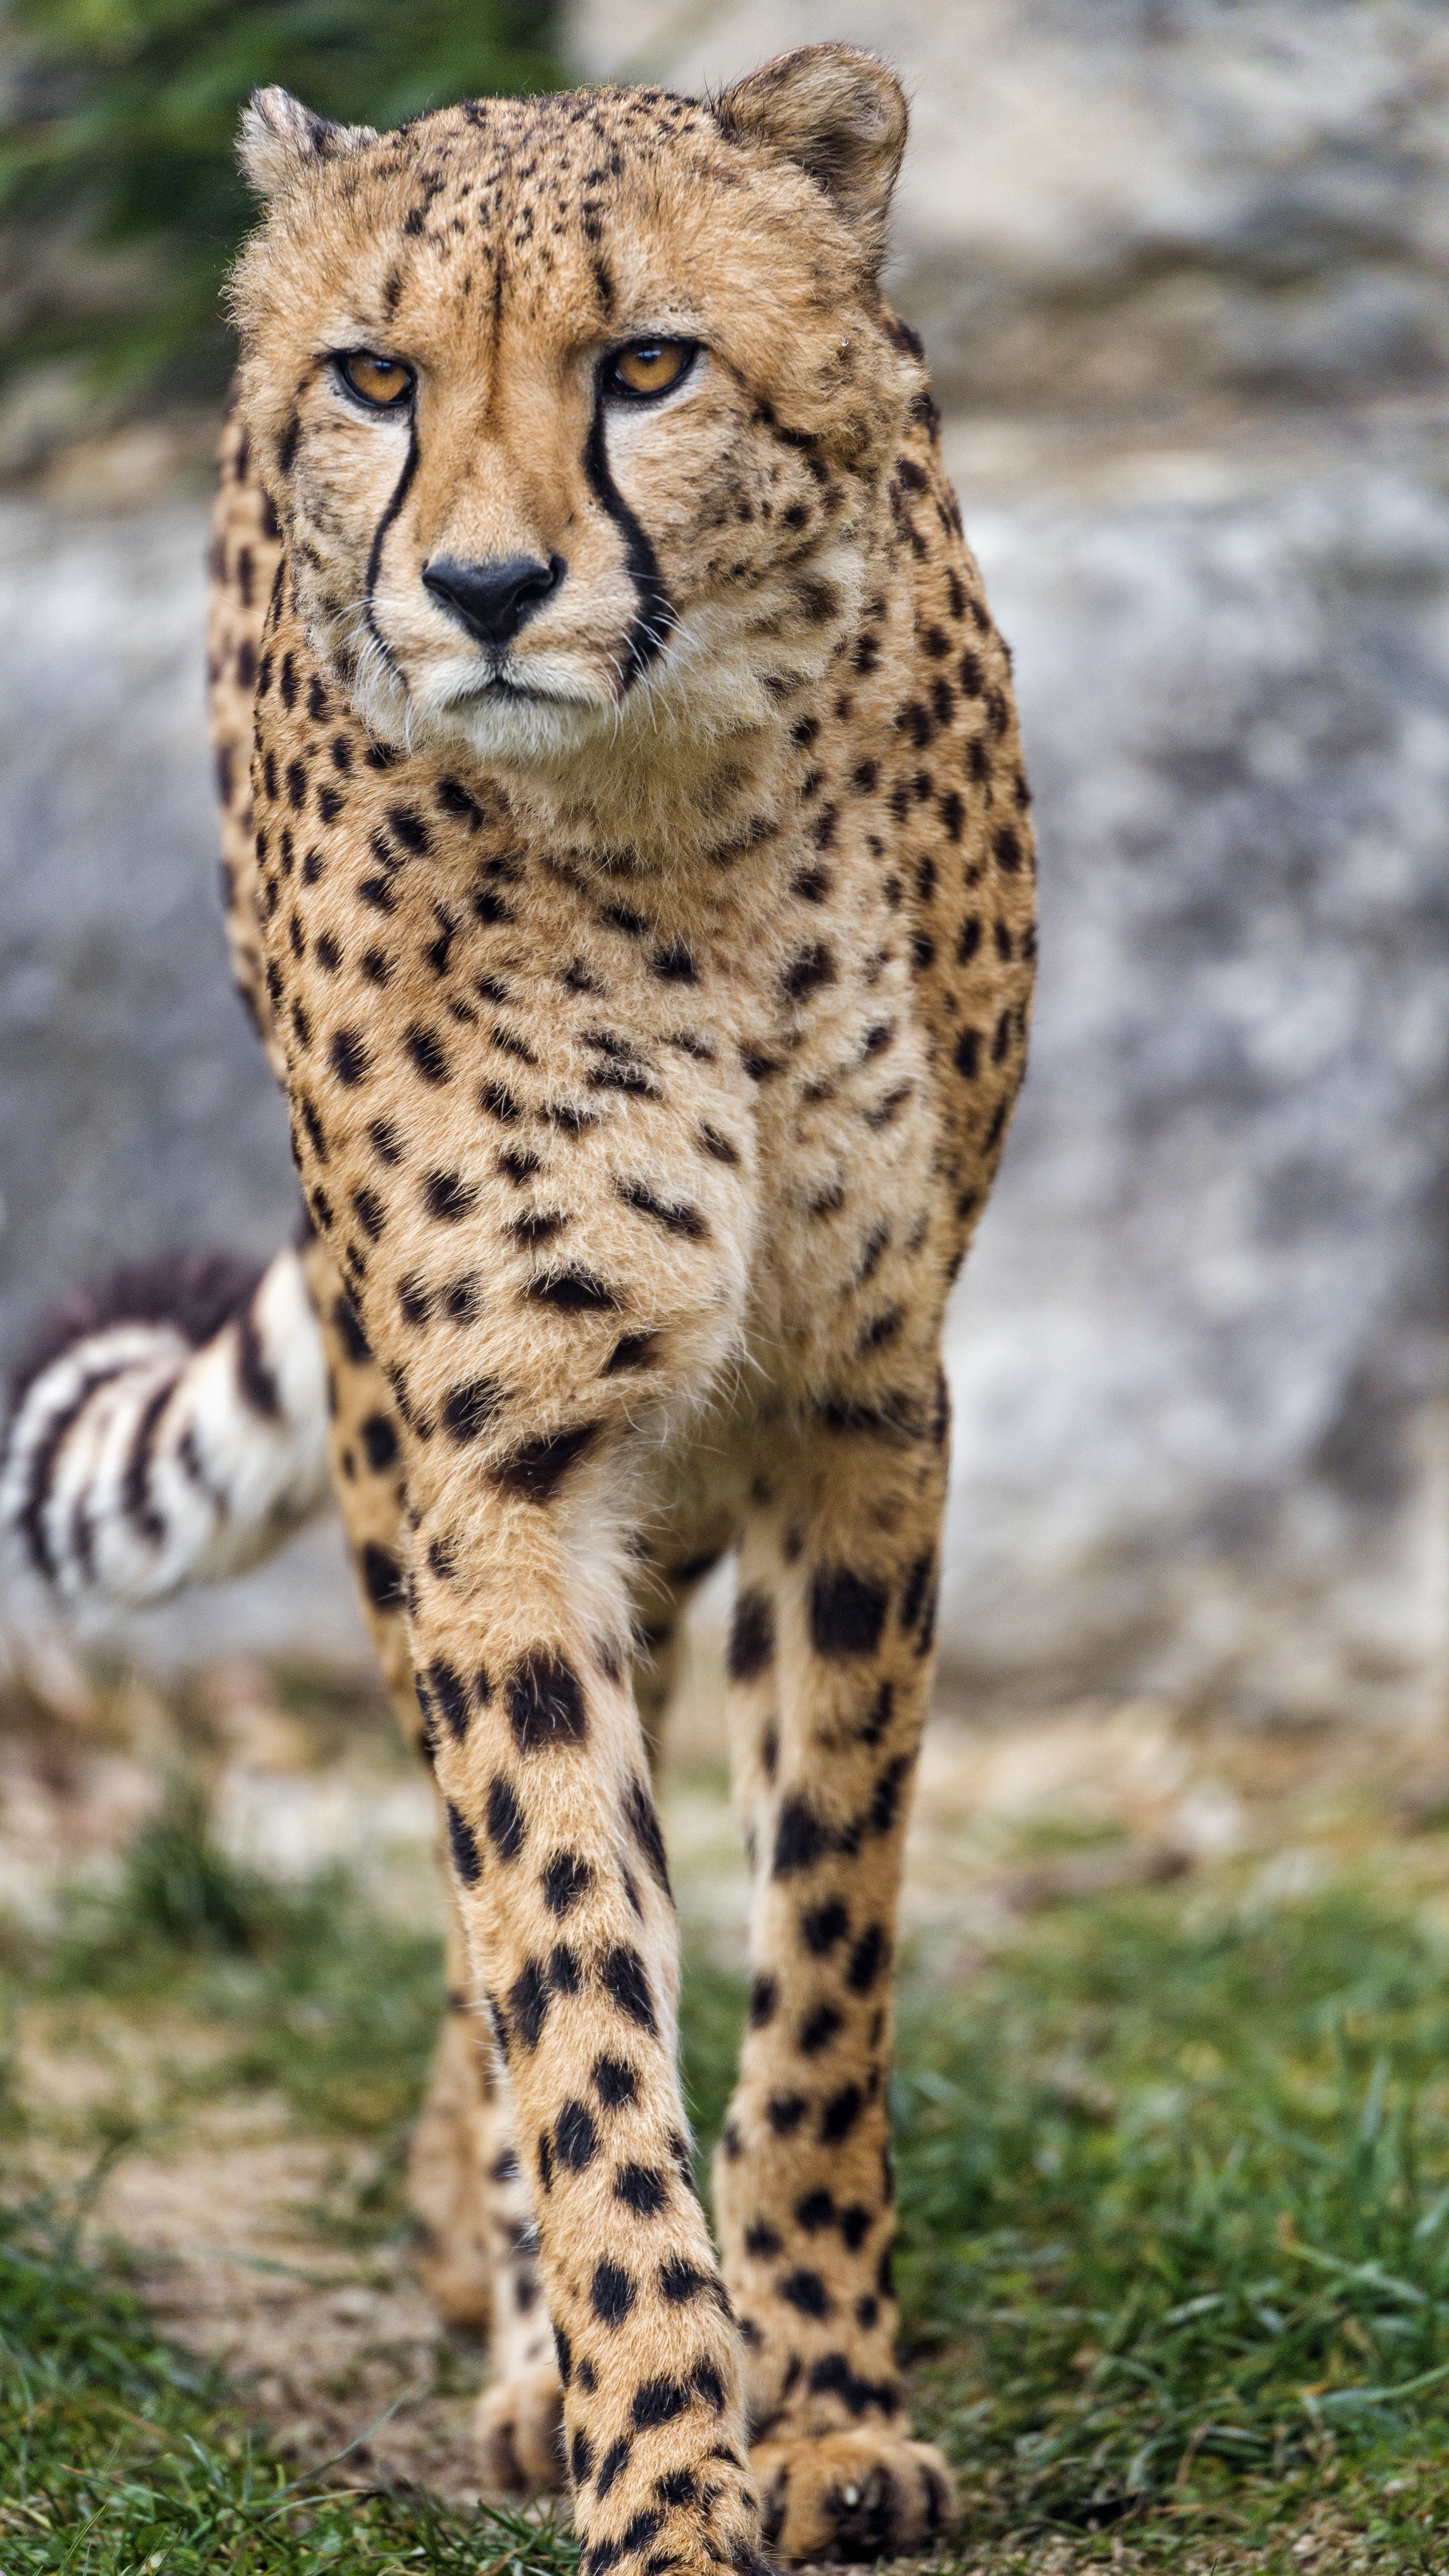 Mobile wallpaper: Cheetah, Sight, Opinion, Paws, Animals, Predator, Big Cat,  121073 download the picture for free.